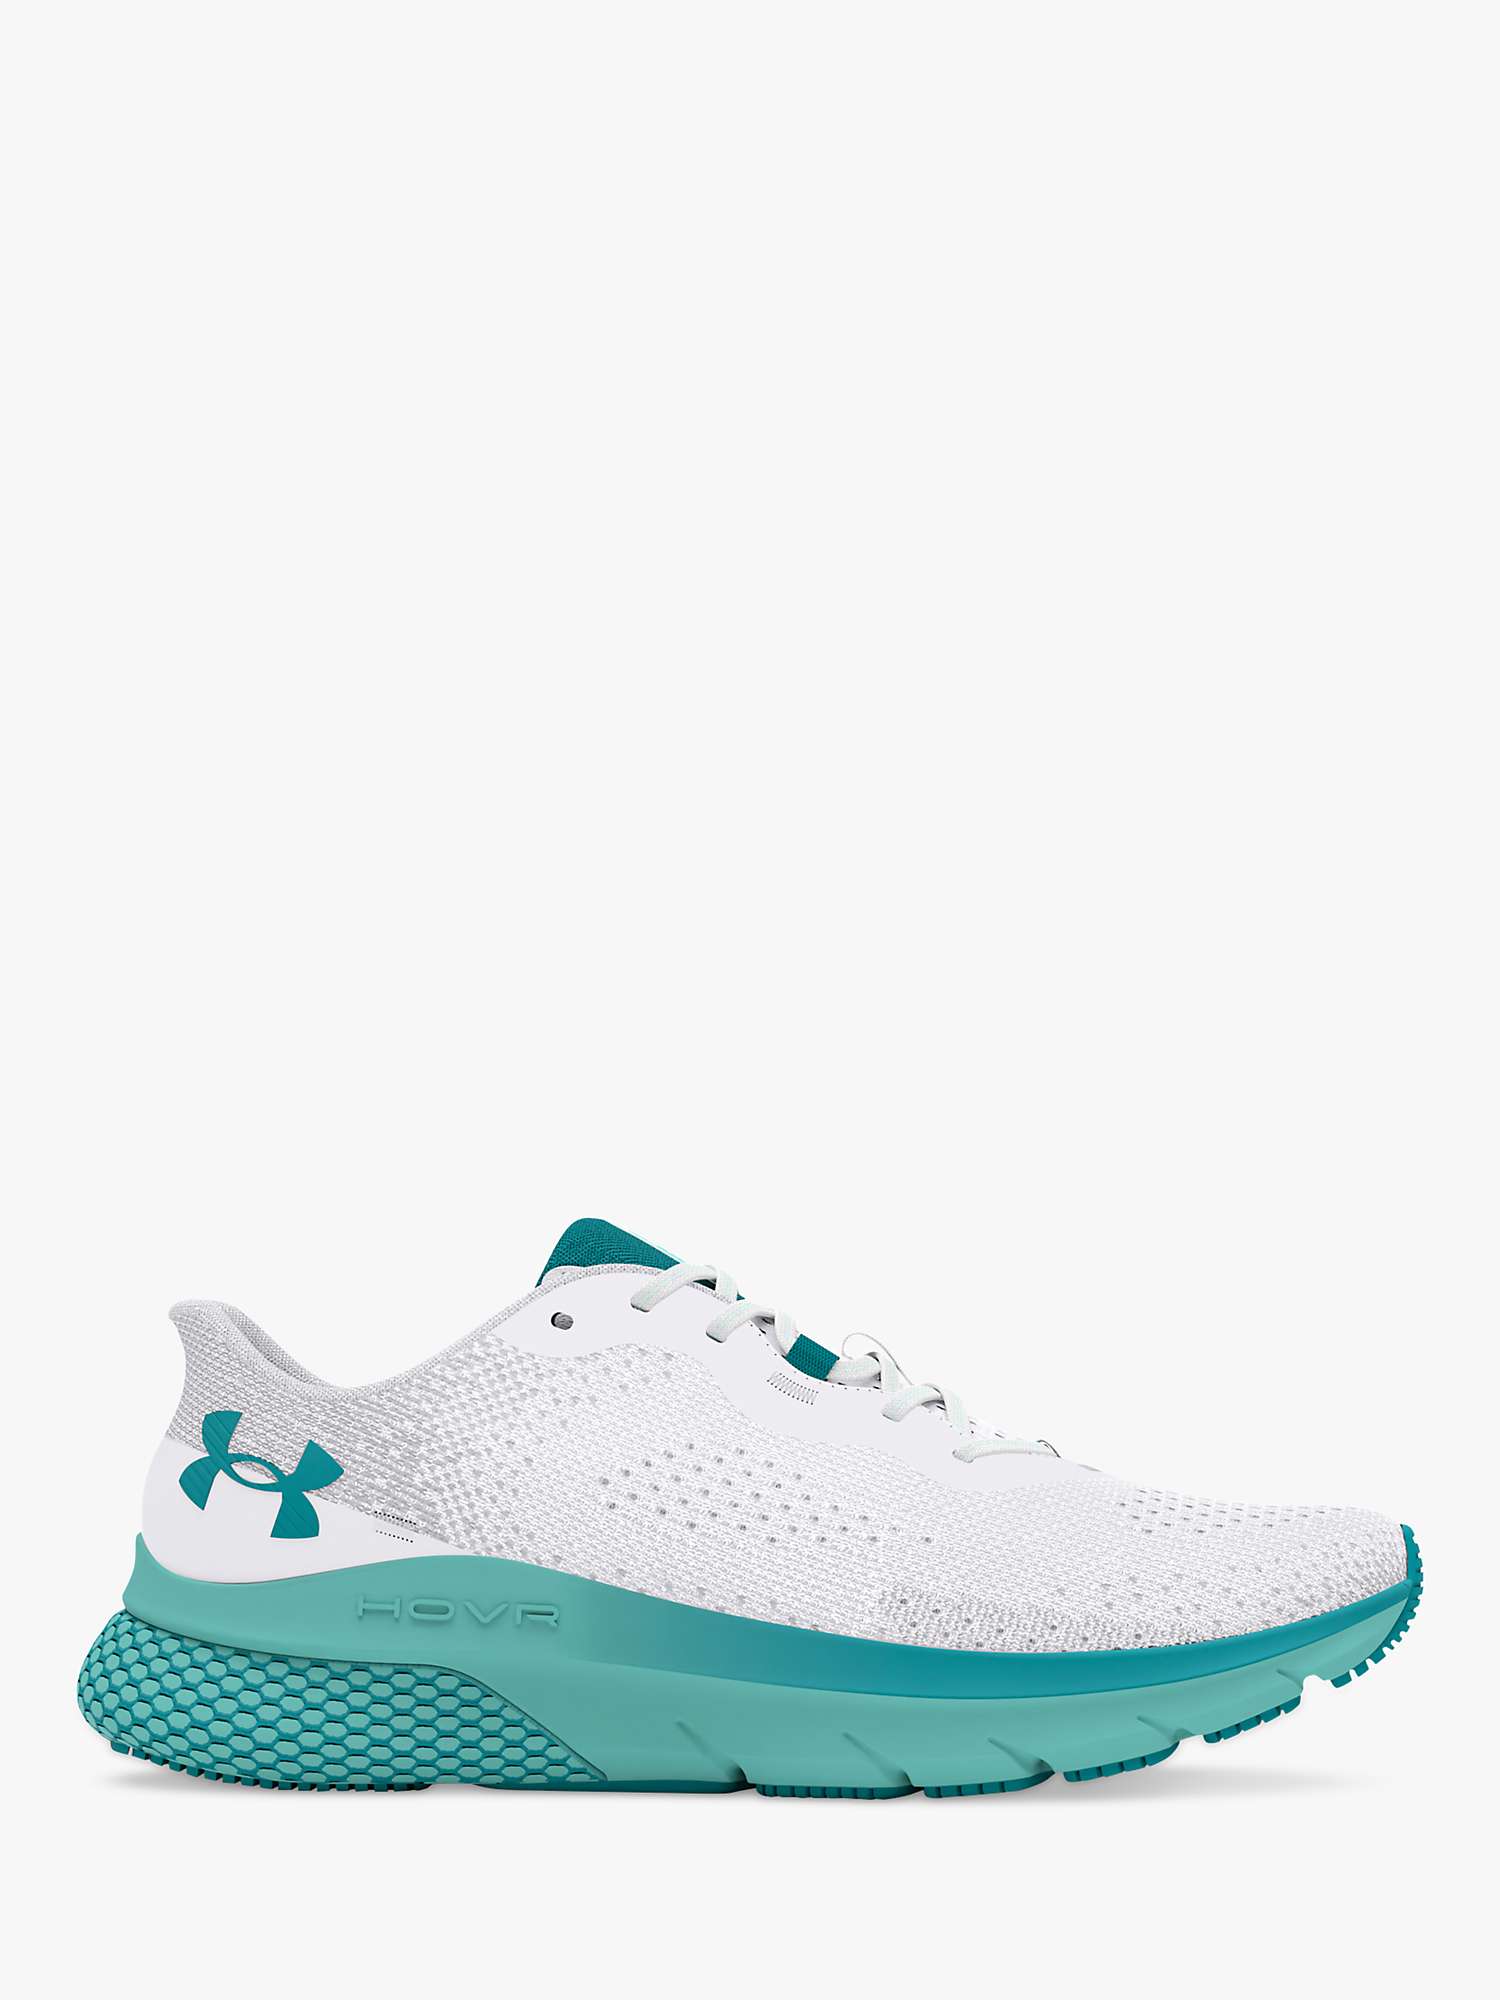 Buy Under Armour Turbulence 2 Running Shoes, White/Circuit Teal Online at johnlewis.com